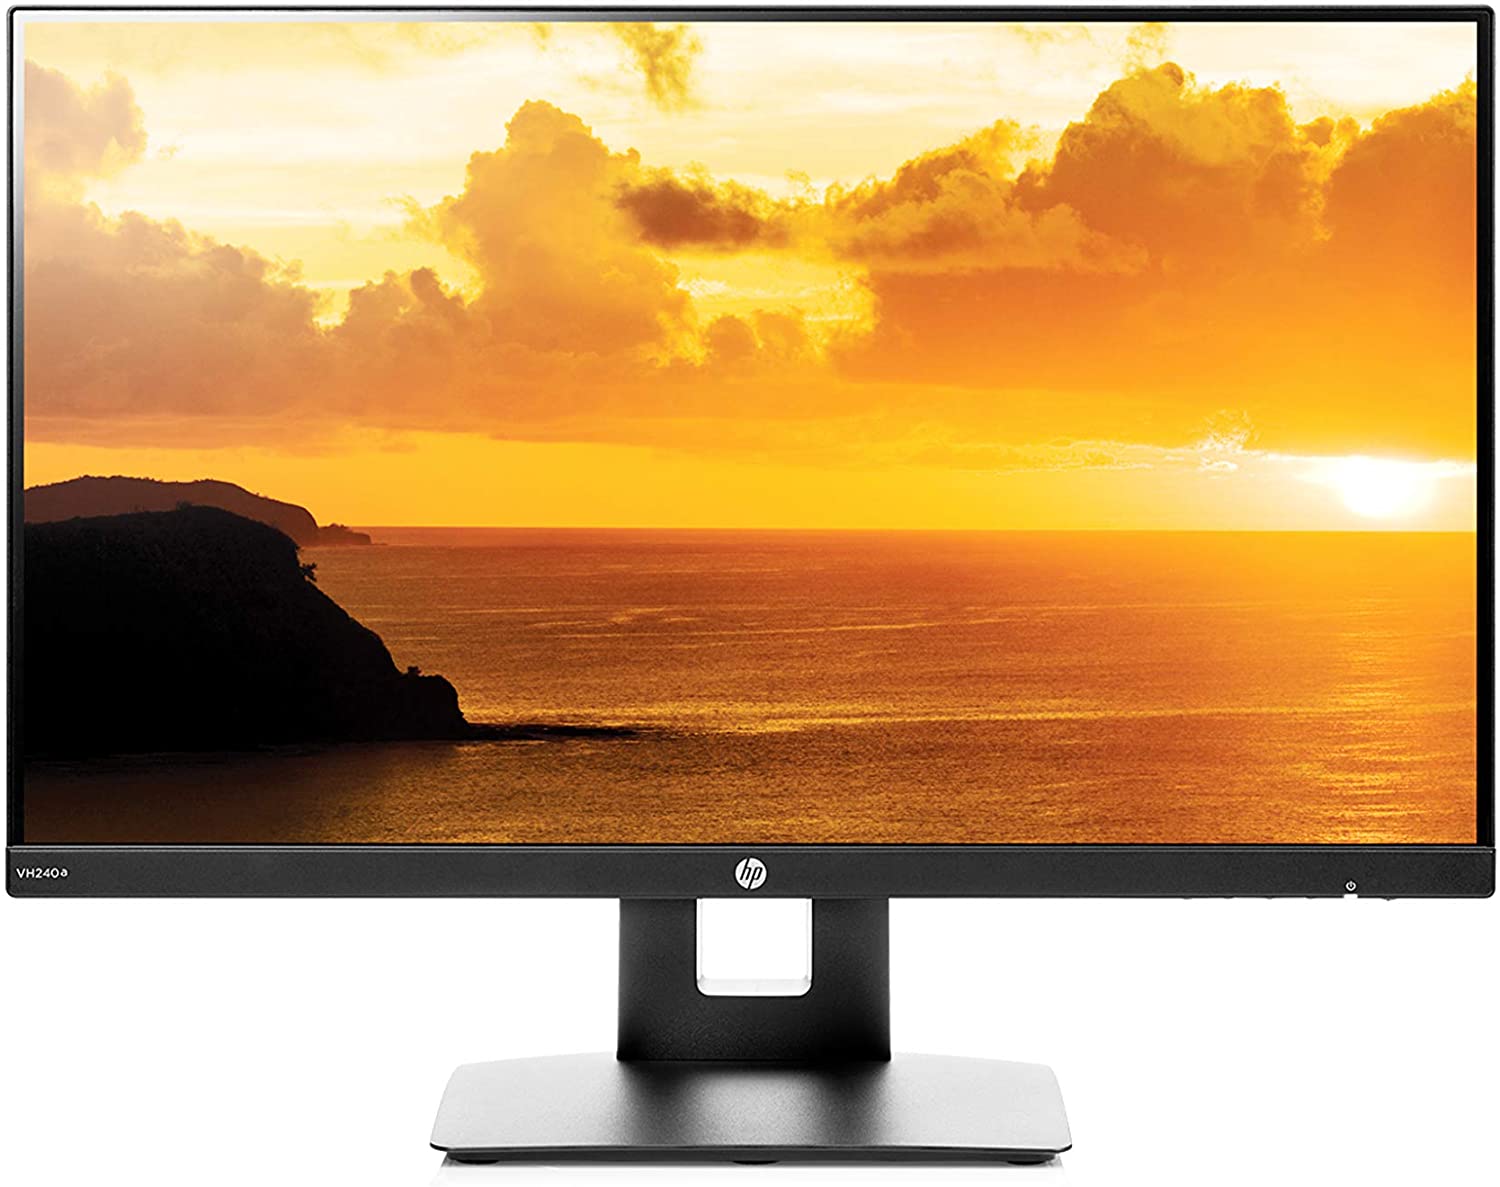 HP monitor with sea and a sunset as a background